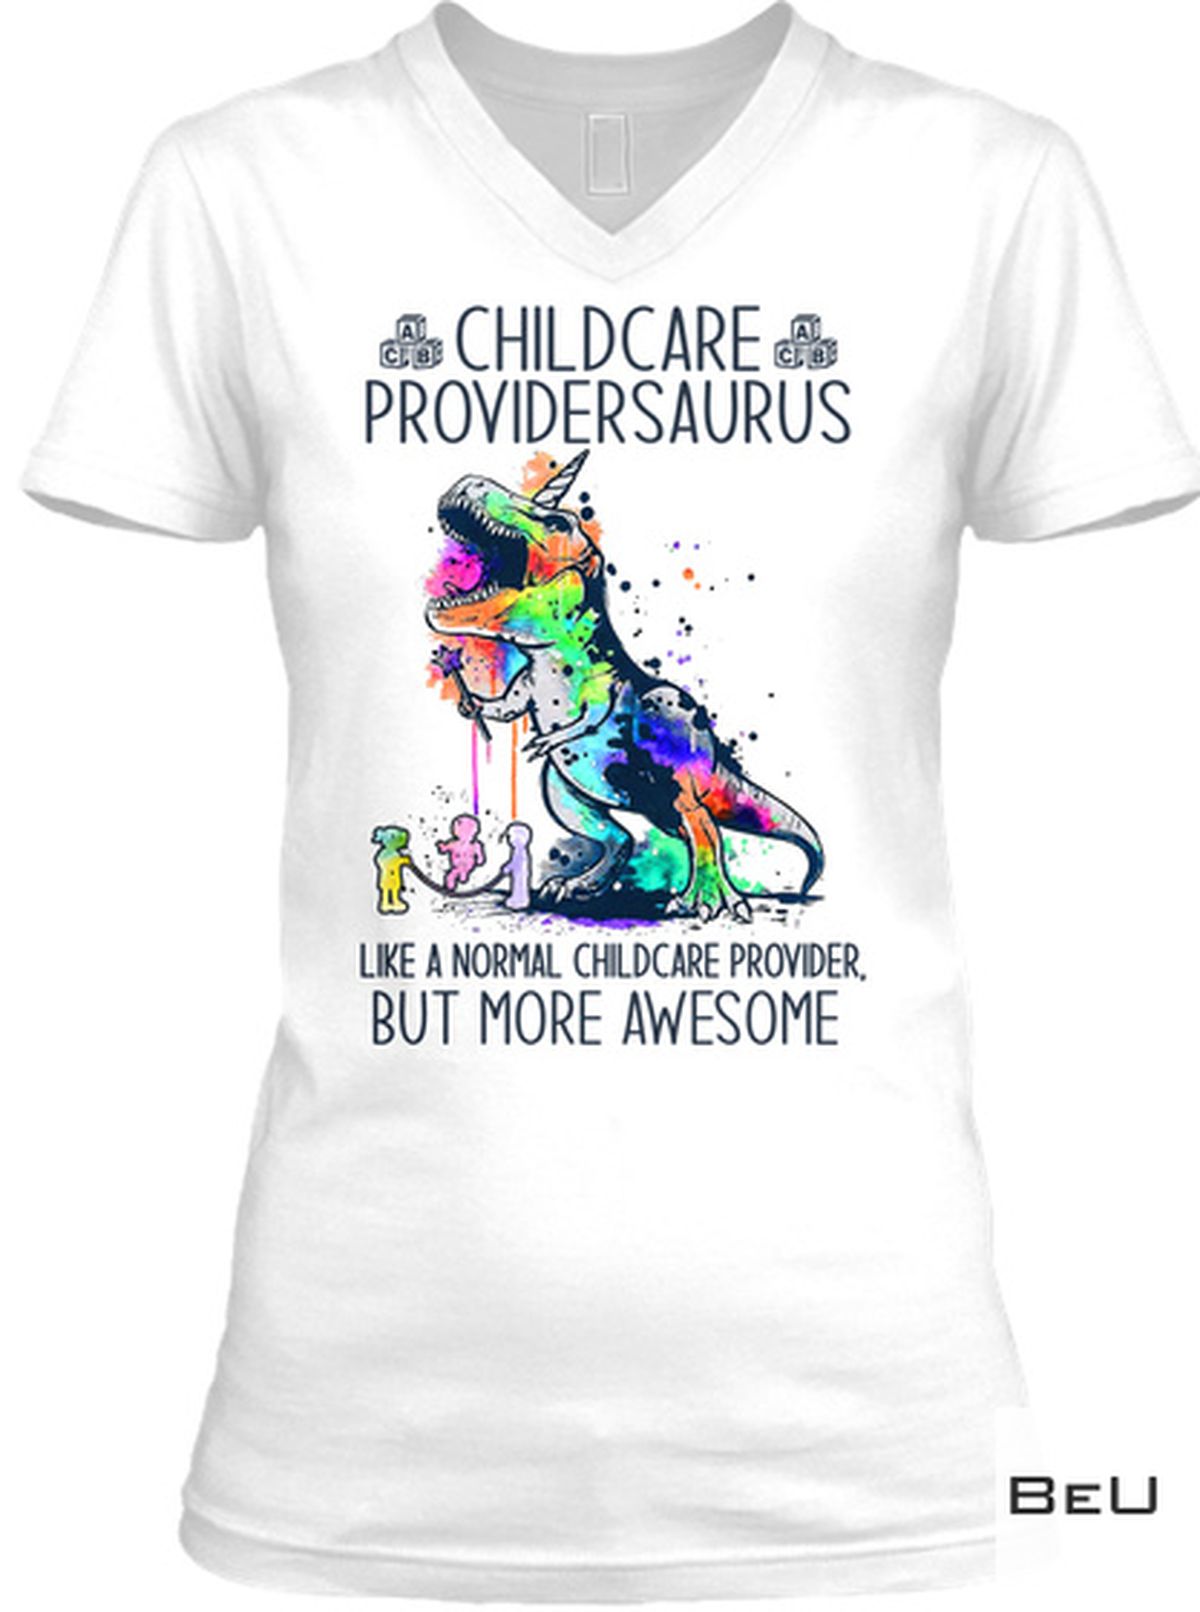 Childcare Providersaurus Like A Normal Chilcare Provider But More Awesome Shirt